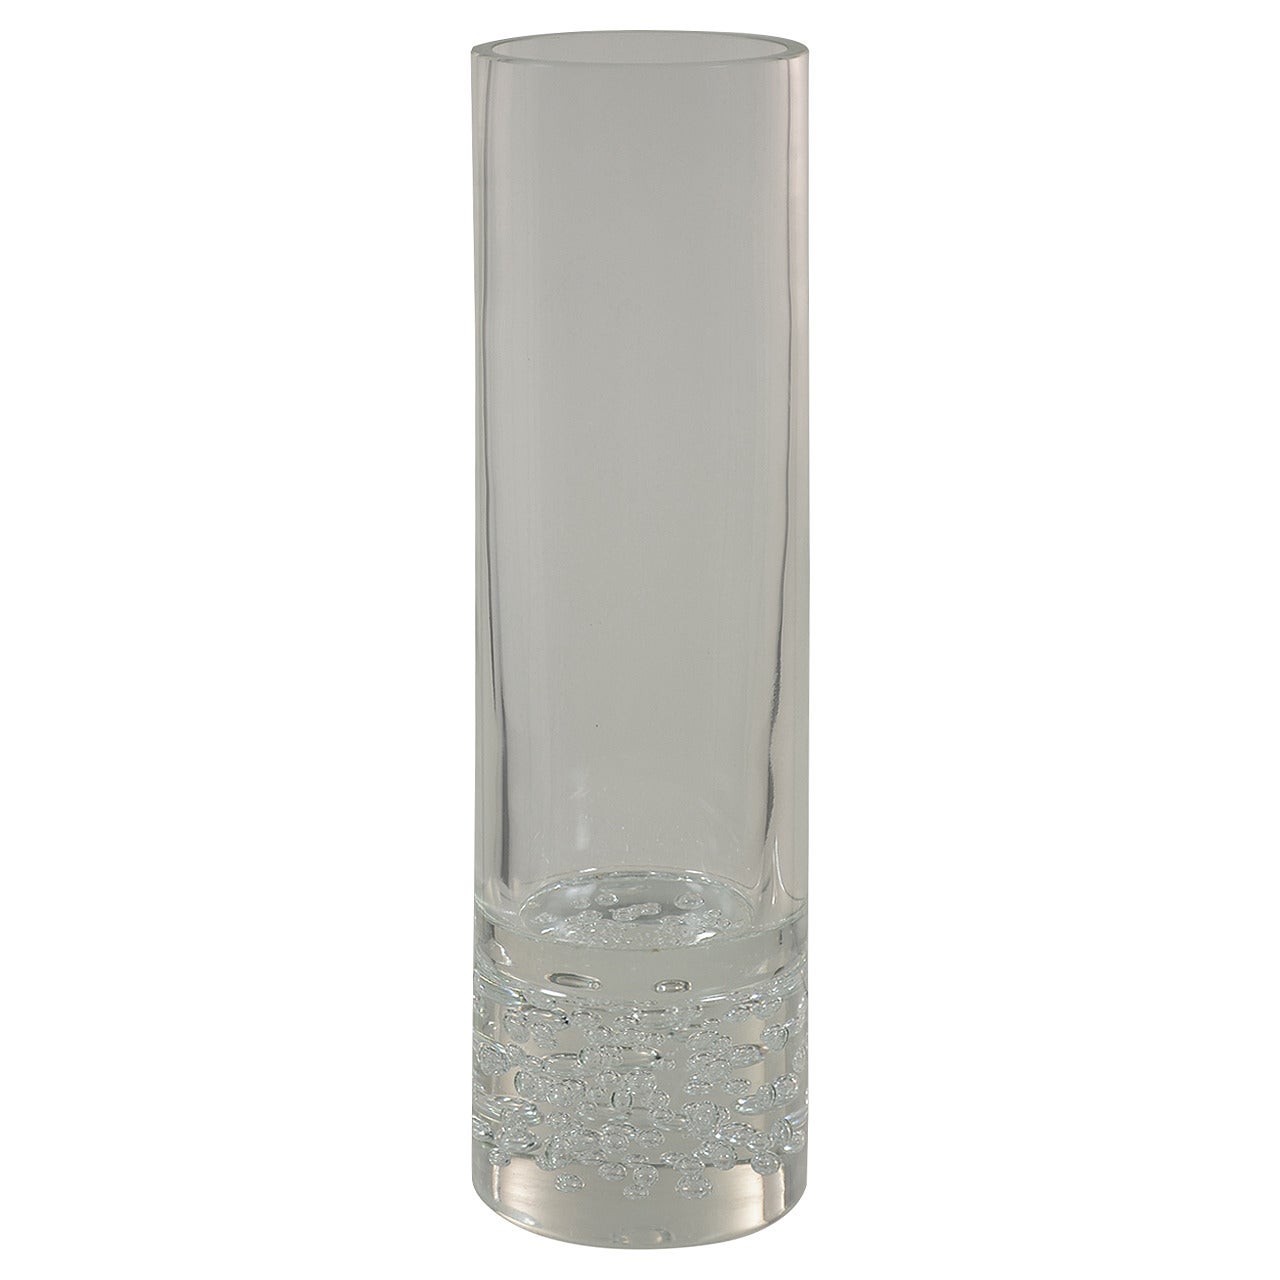 Large Clear Vase Designed by Livio Seguso, Produced by Seguso A.V